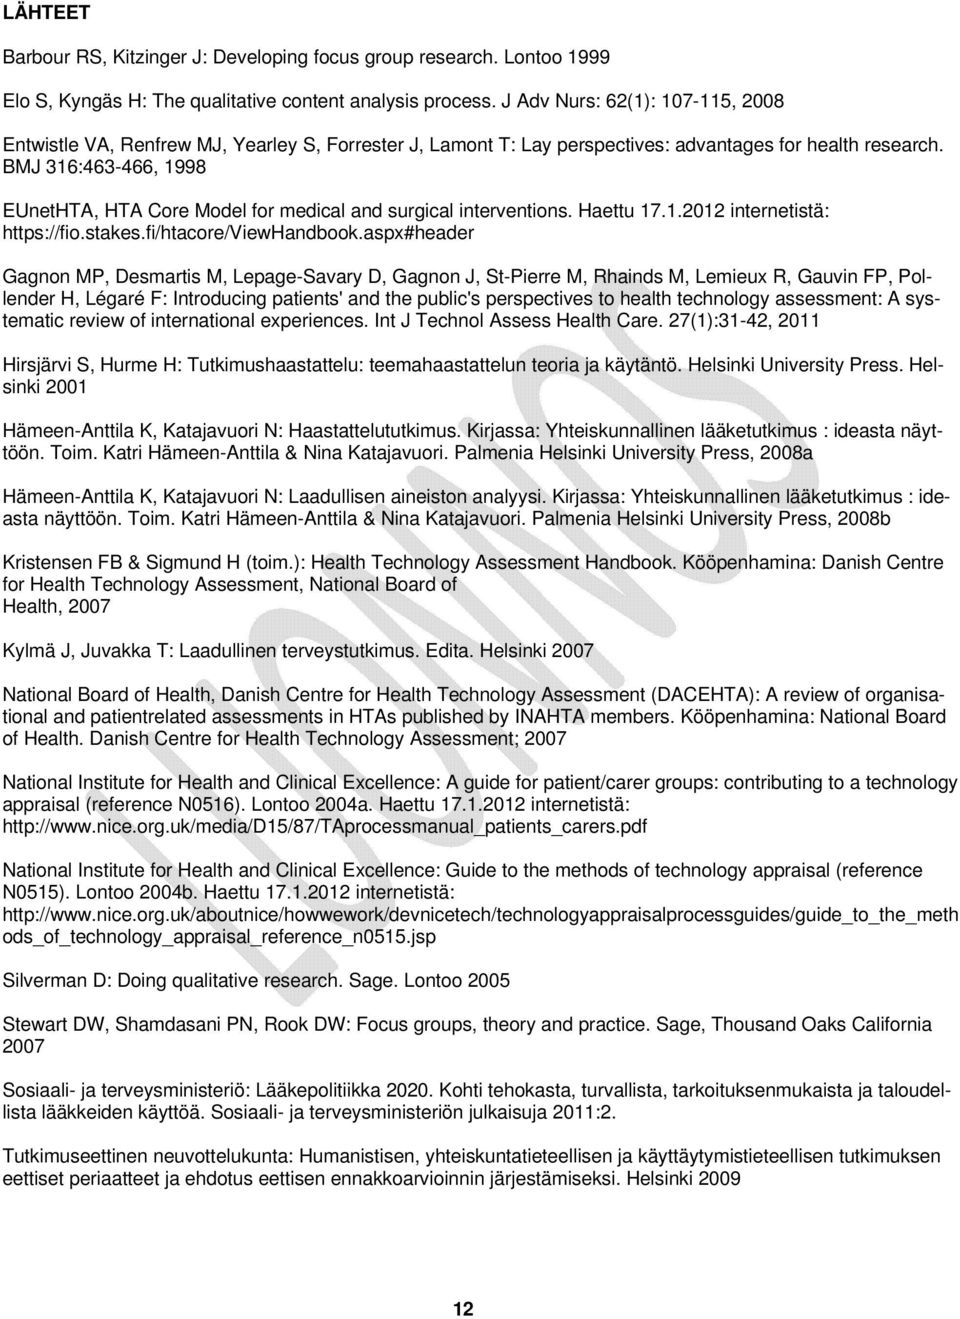 BMJ 316:463-466, 1998 EUnetHTA, HTA Core Model for medical and surgical interventions. Haettu 17.1.2012 internetistä: https://fio.stakes.fi/htacore/viewhandbook.